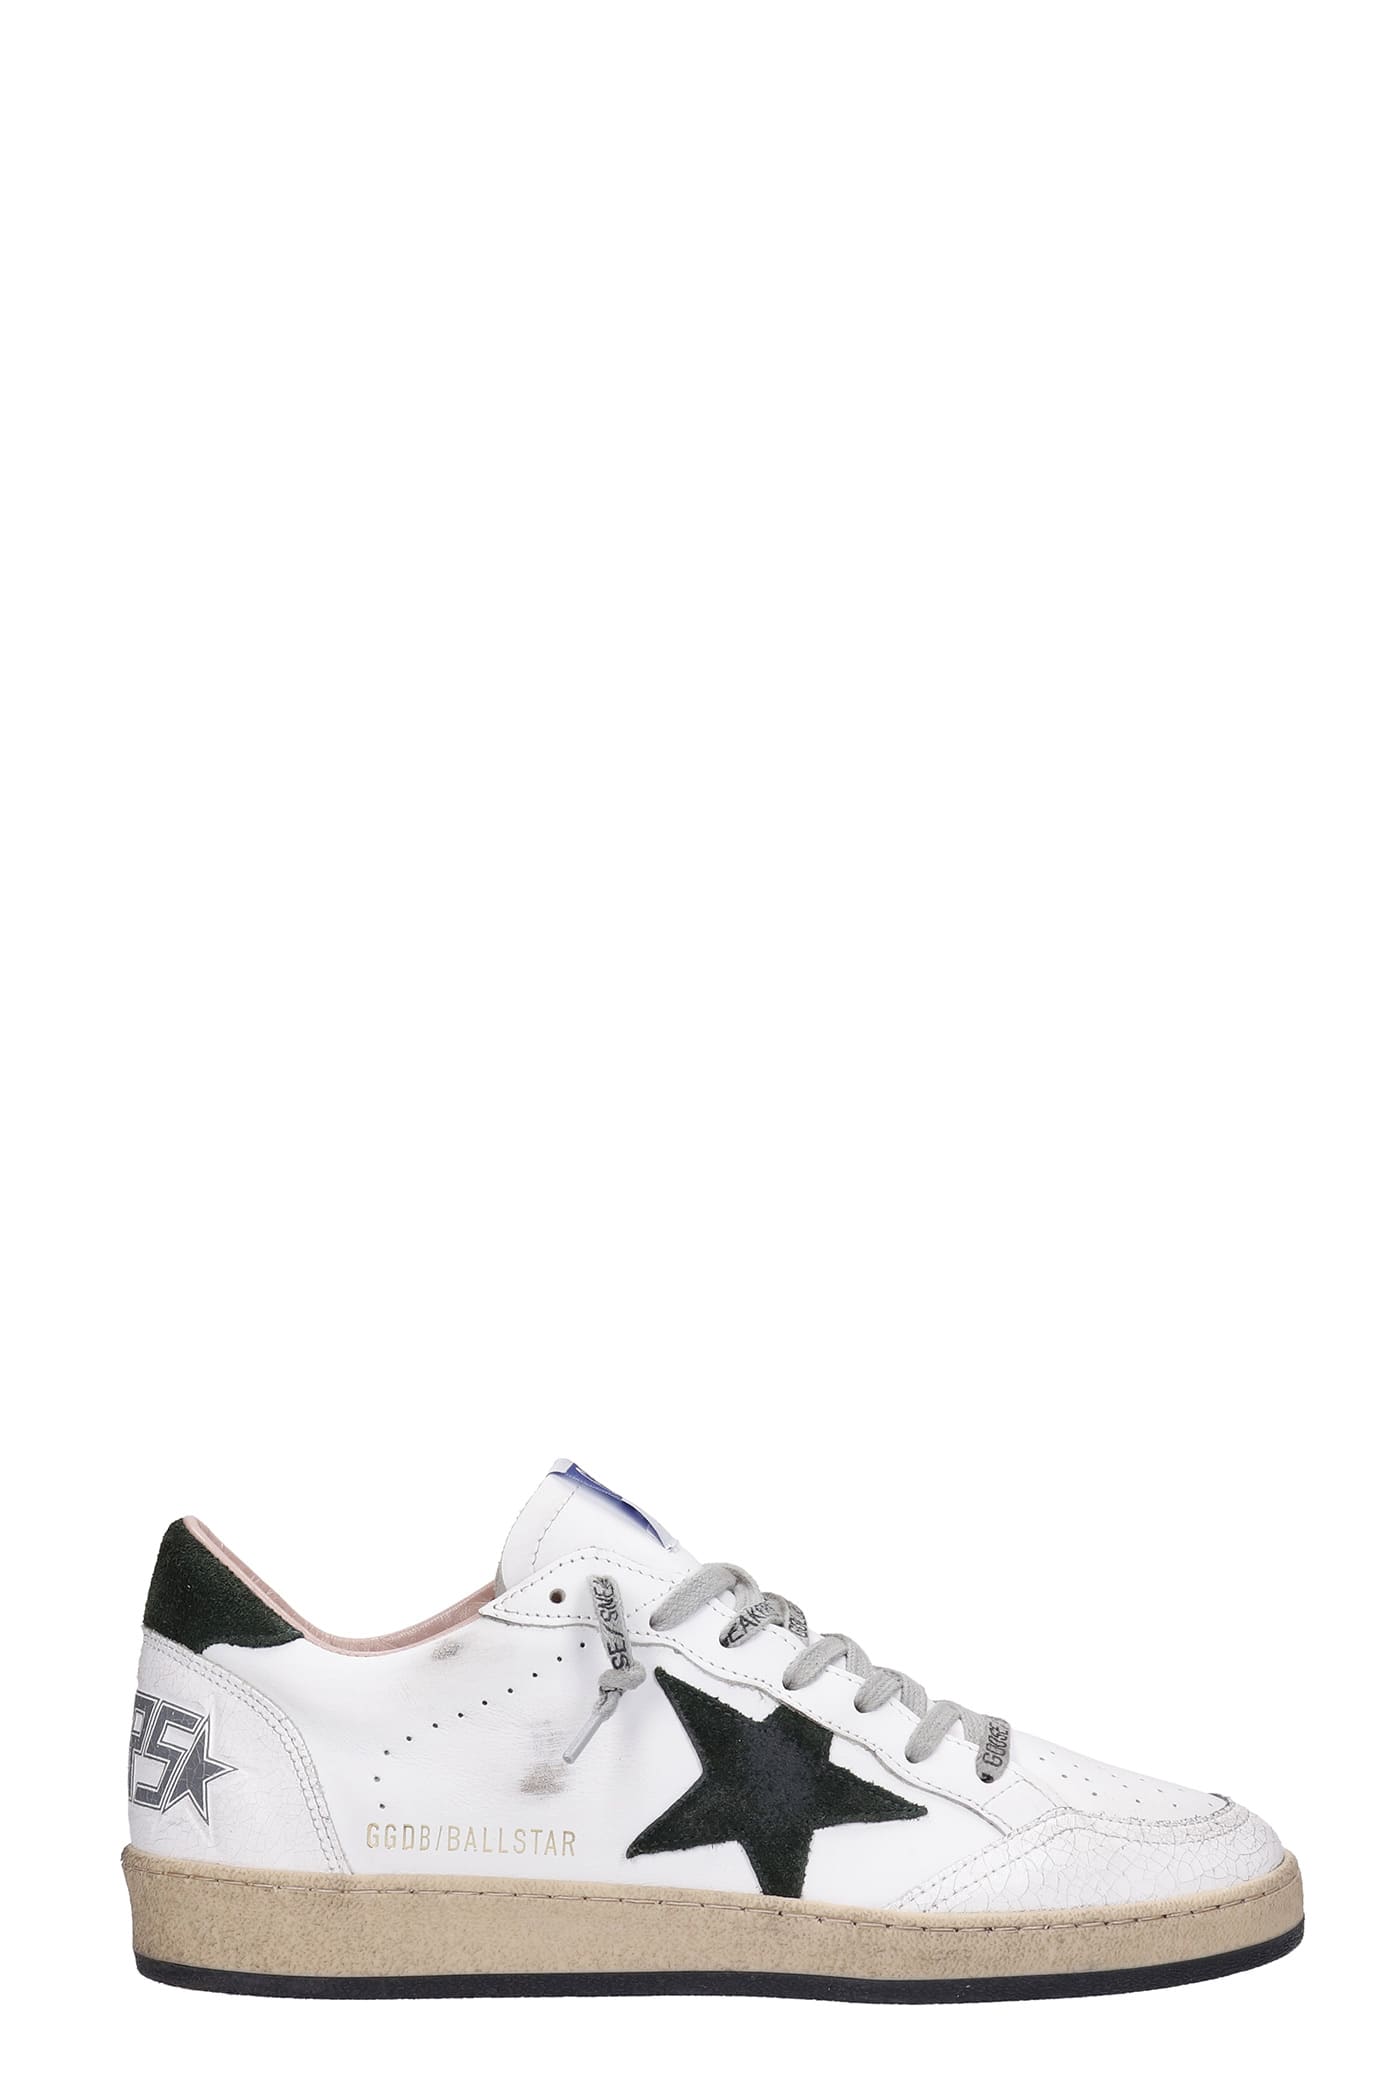 Golden Goose Ball Star Sneakers In White Green Leather